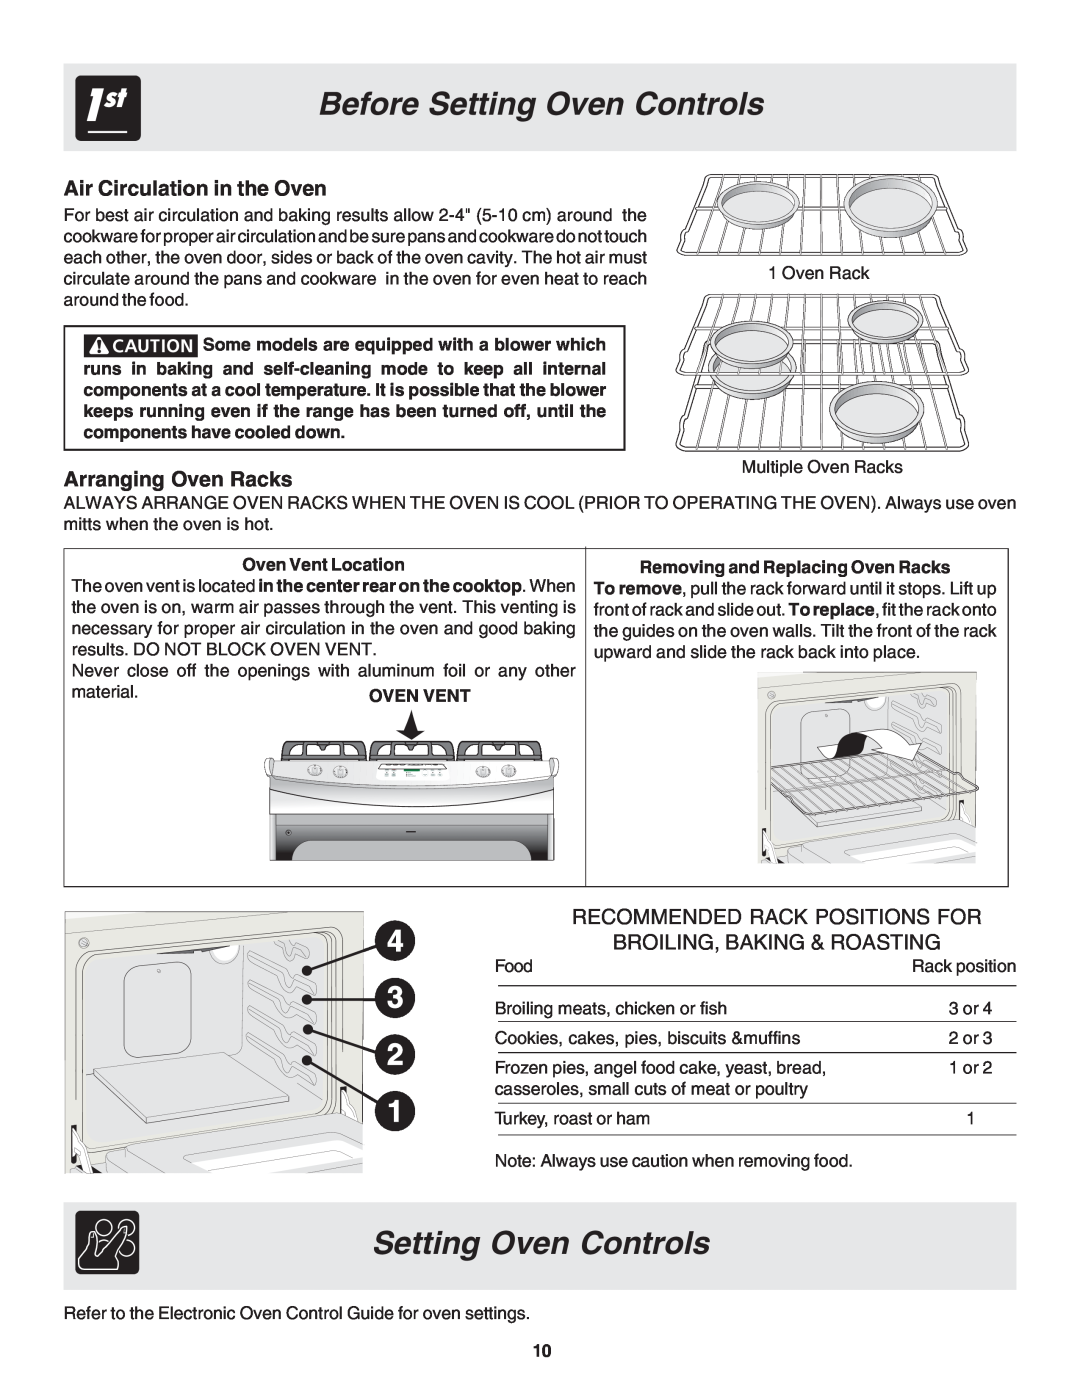 Frigidaire 318203866 warranty Before Setting Oven Controls, Air Circulation in the Oven, Arranging Oven Racks 